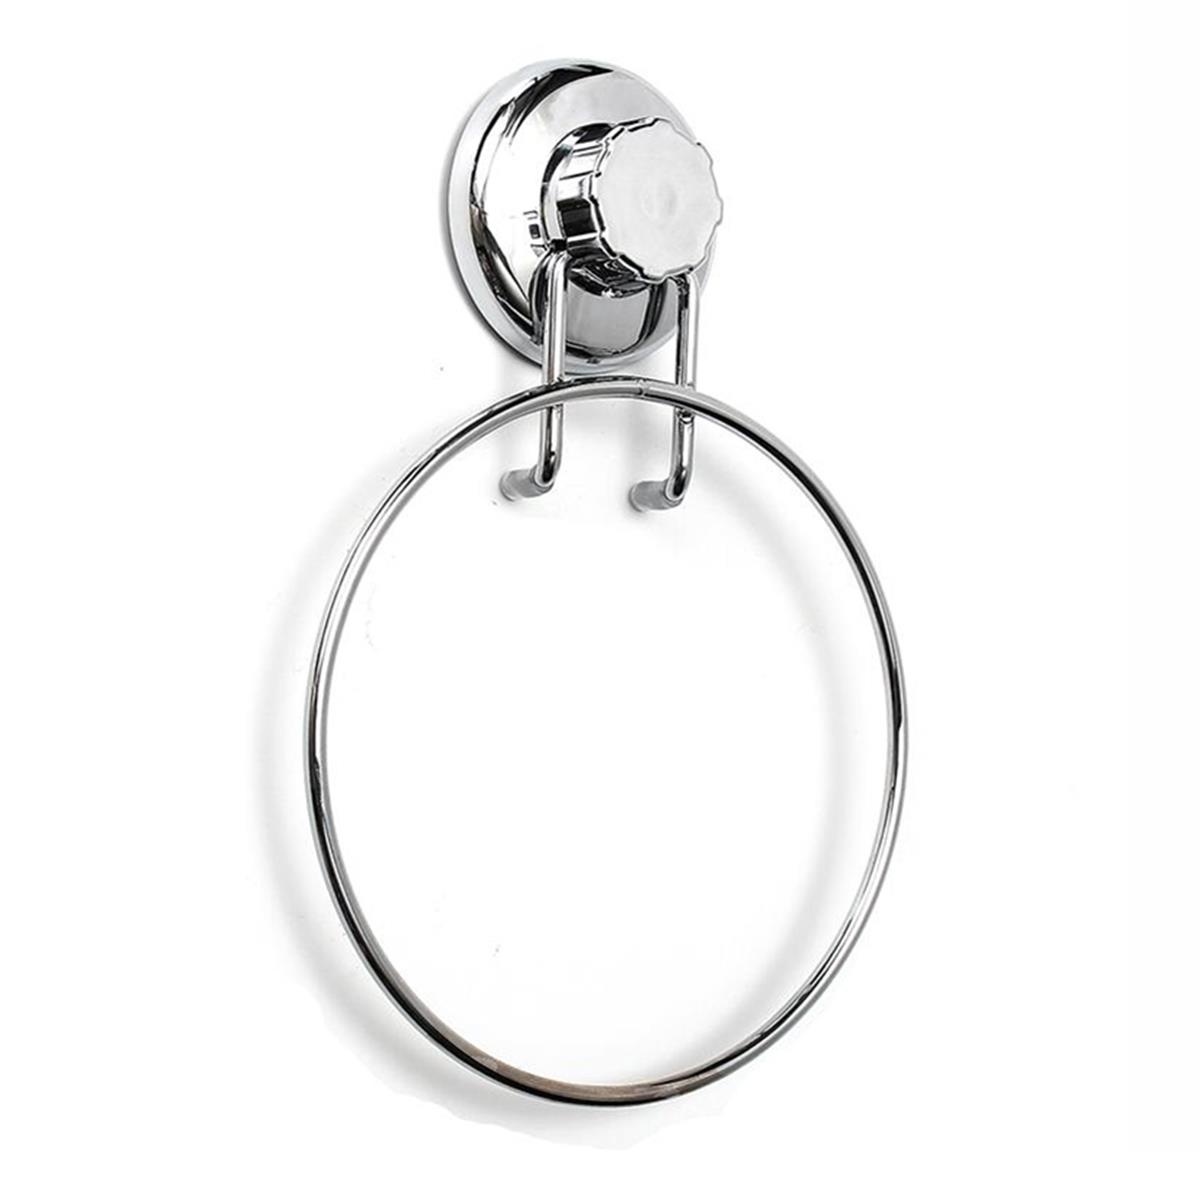 Towel-Ring-Holder-Chrome-No-Drilling-Suction-Cup-Bathroom-Kitchen-Accessory-Towel-Holder-1322963